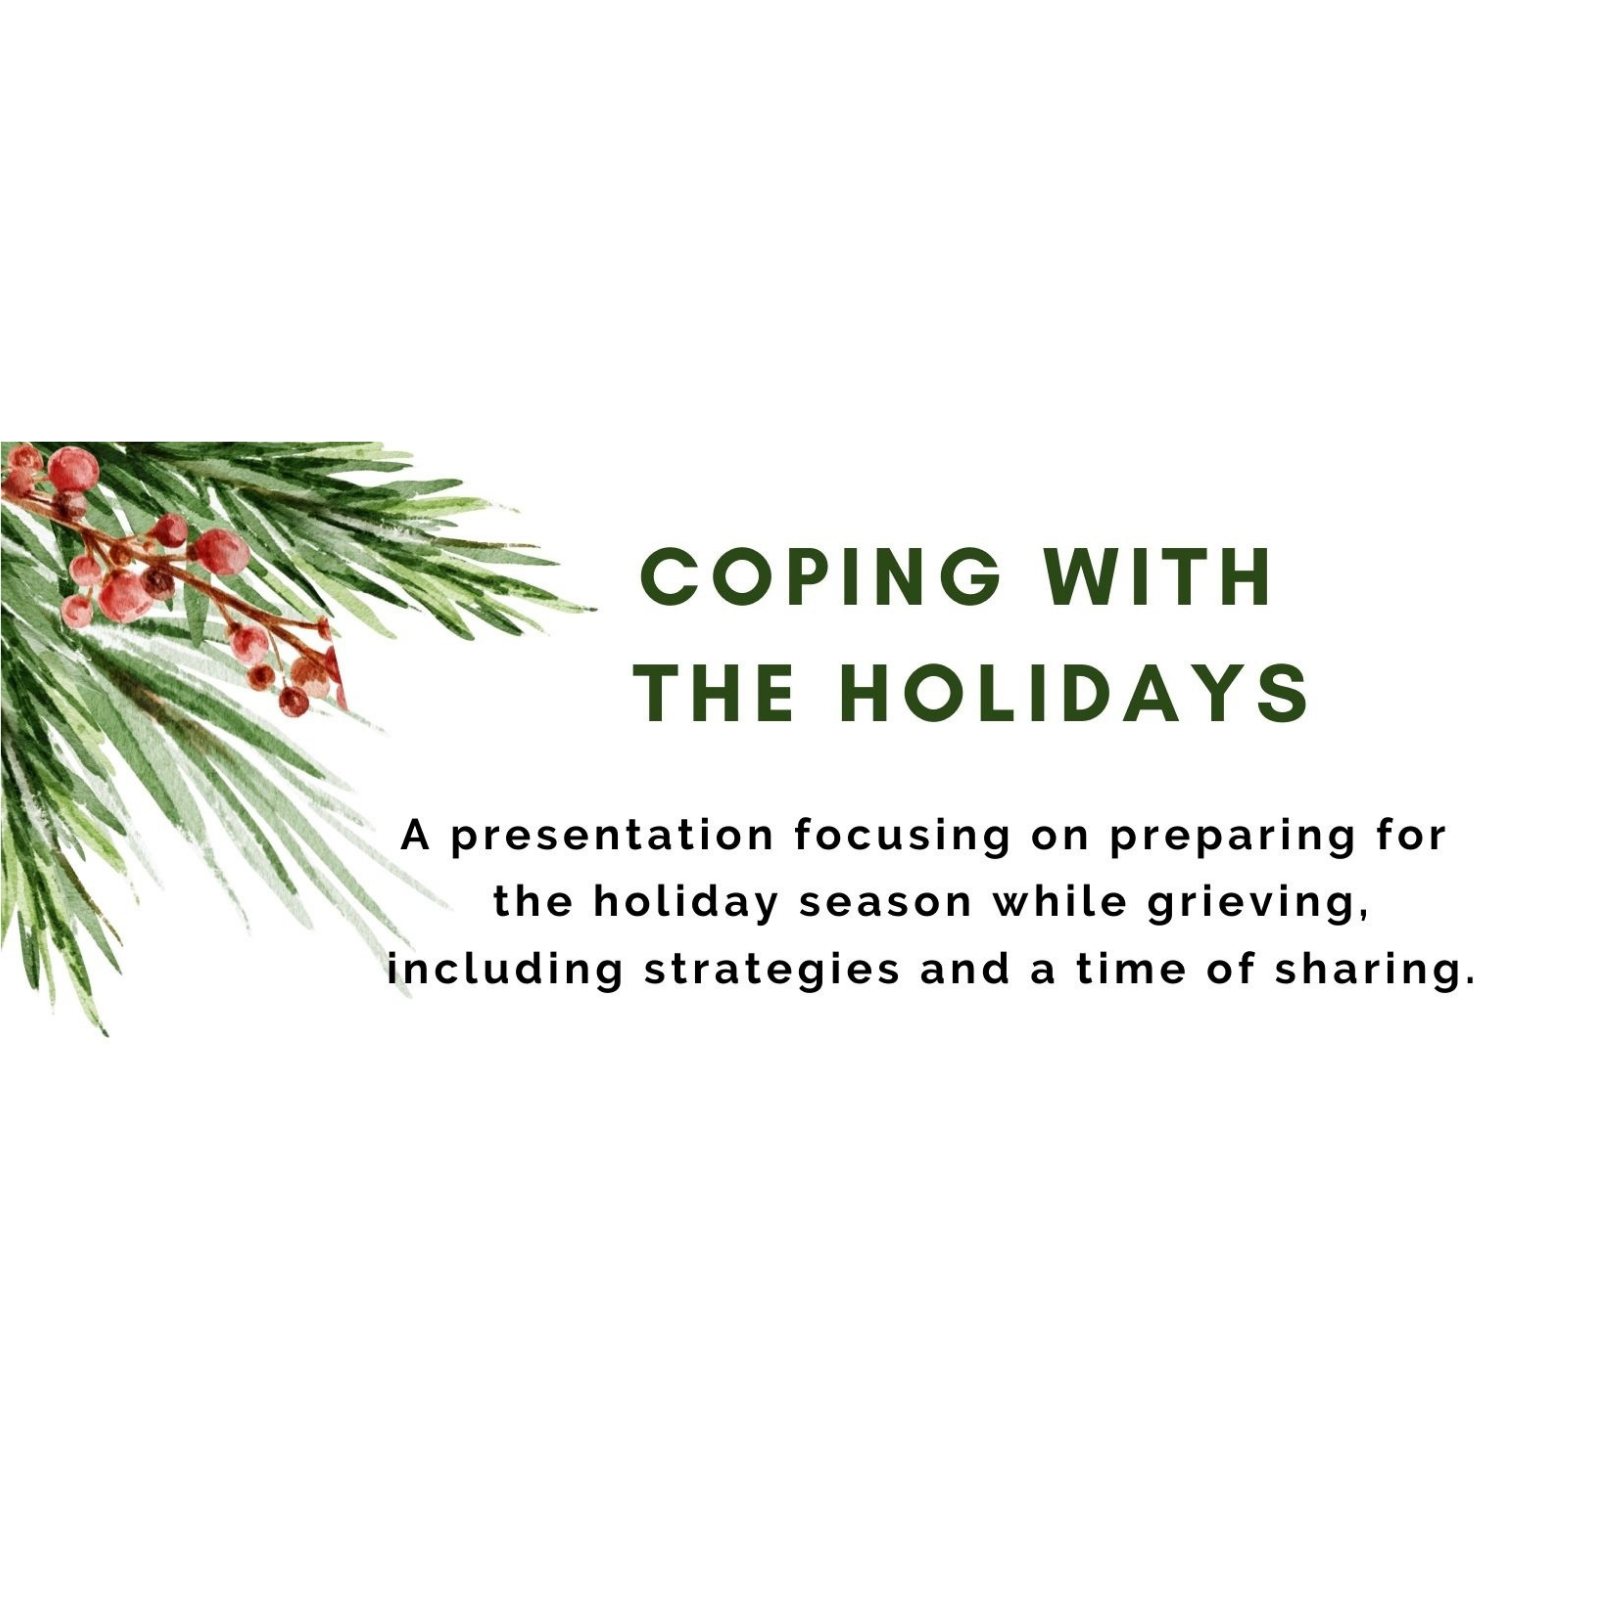 Coping with the holidays flyer